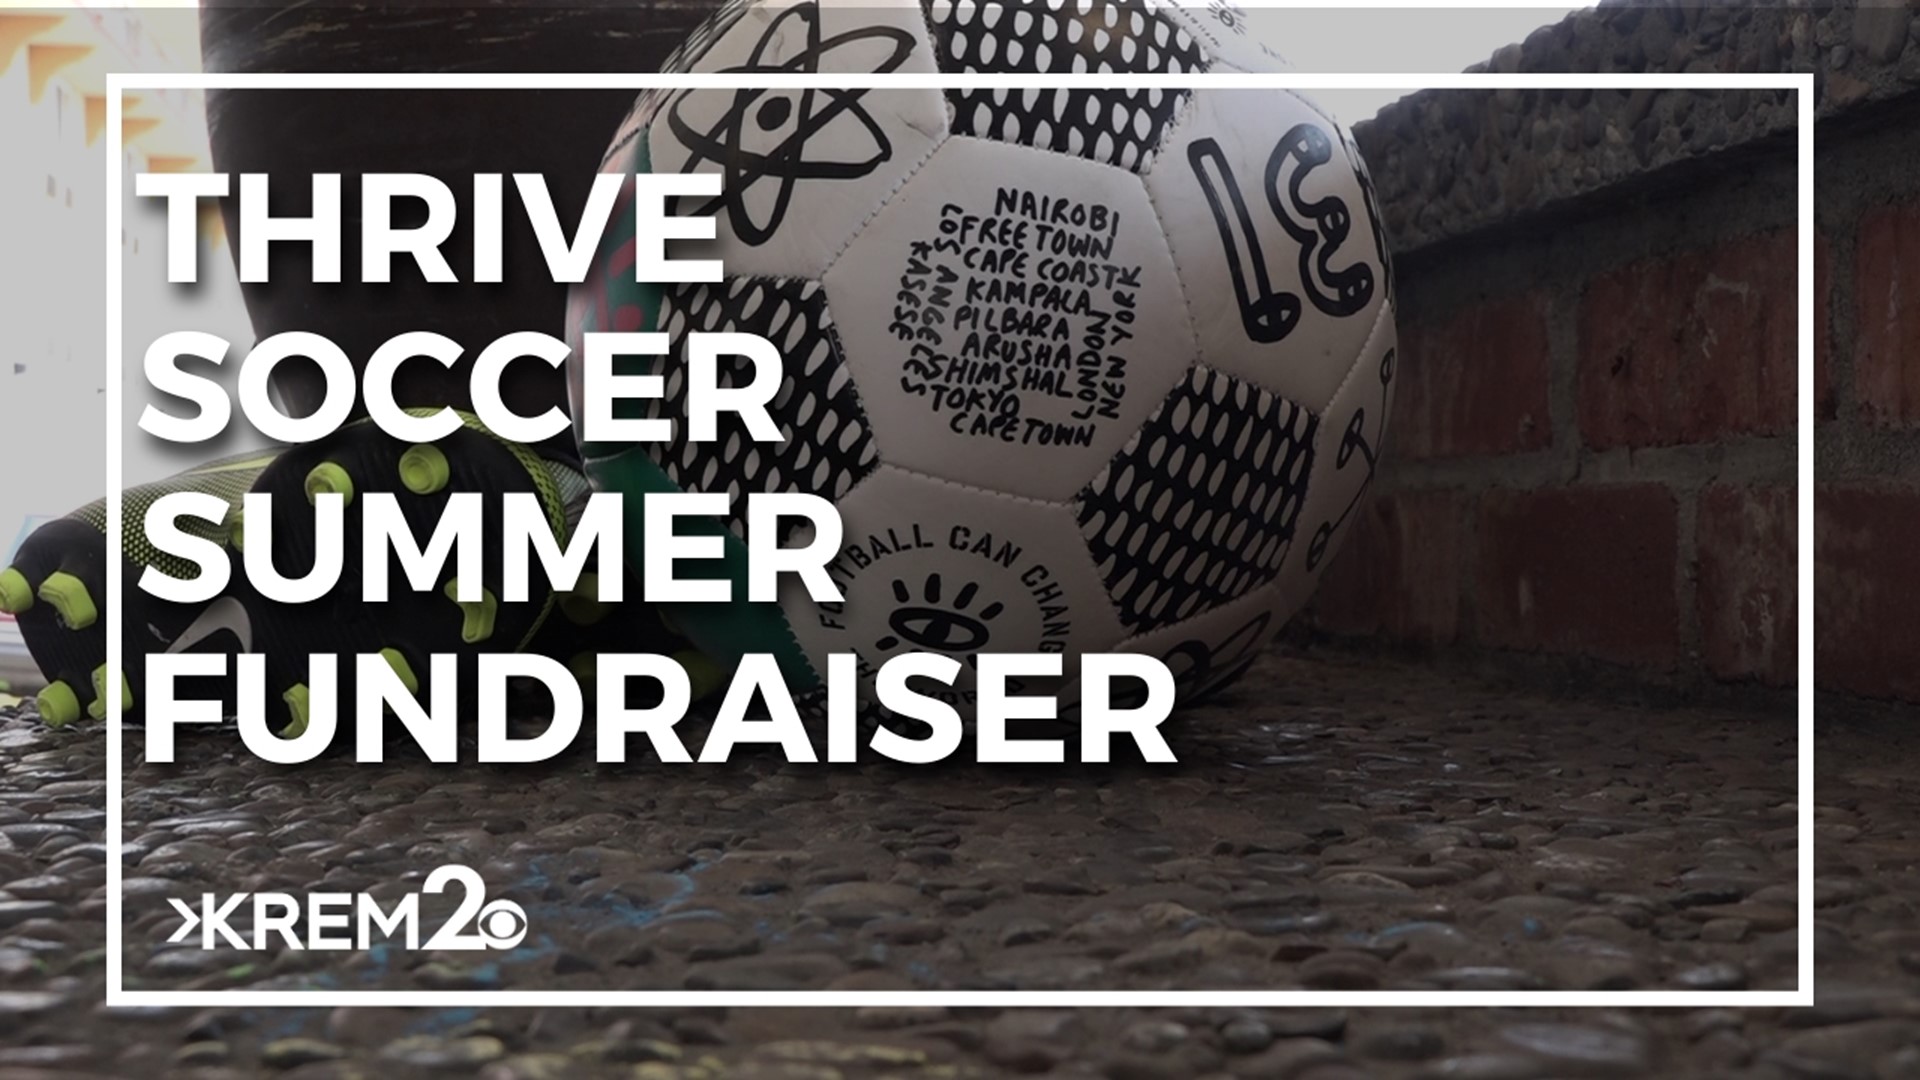 A fundraiser has started on GoFundMe to help raise money for the soccer camp.